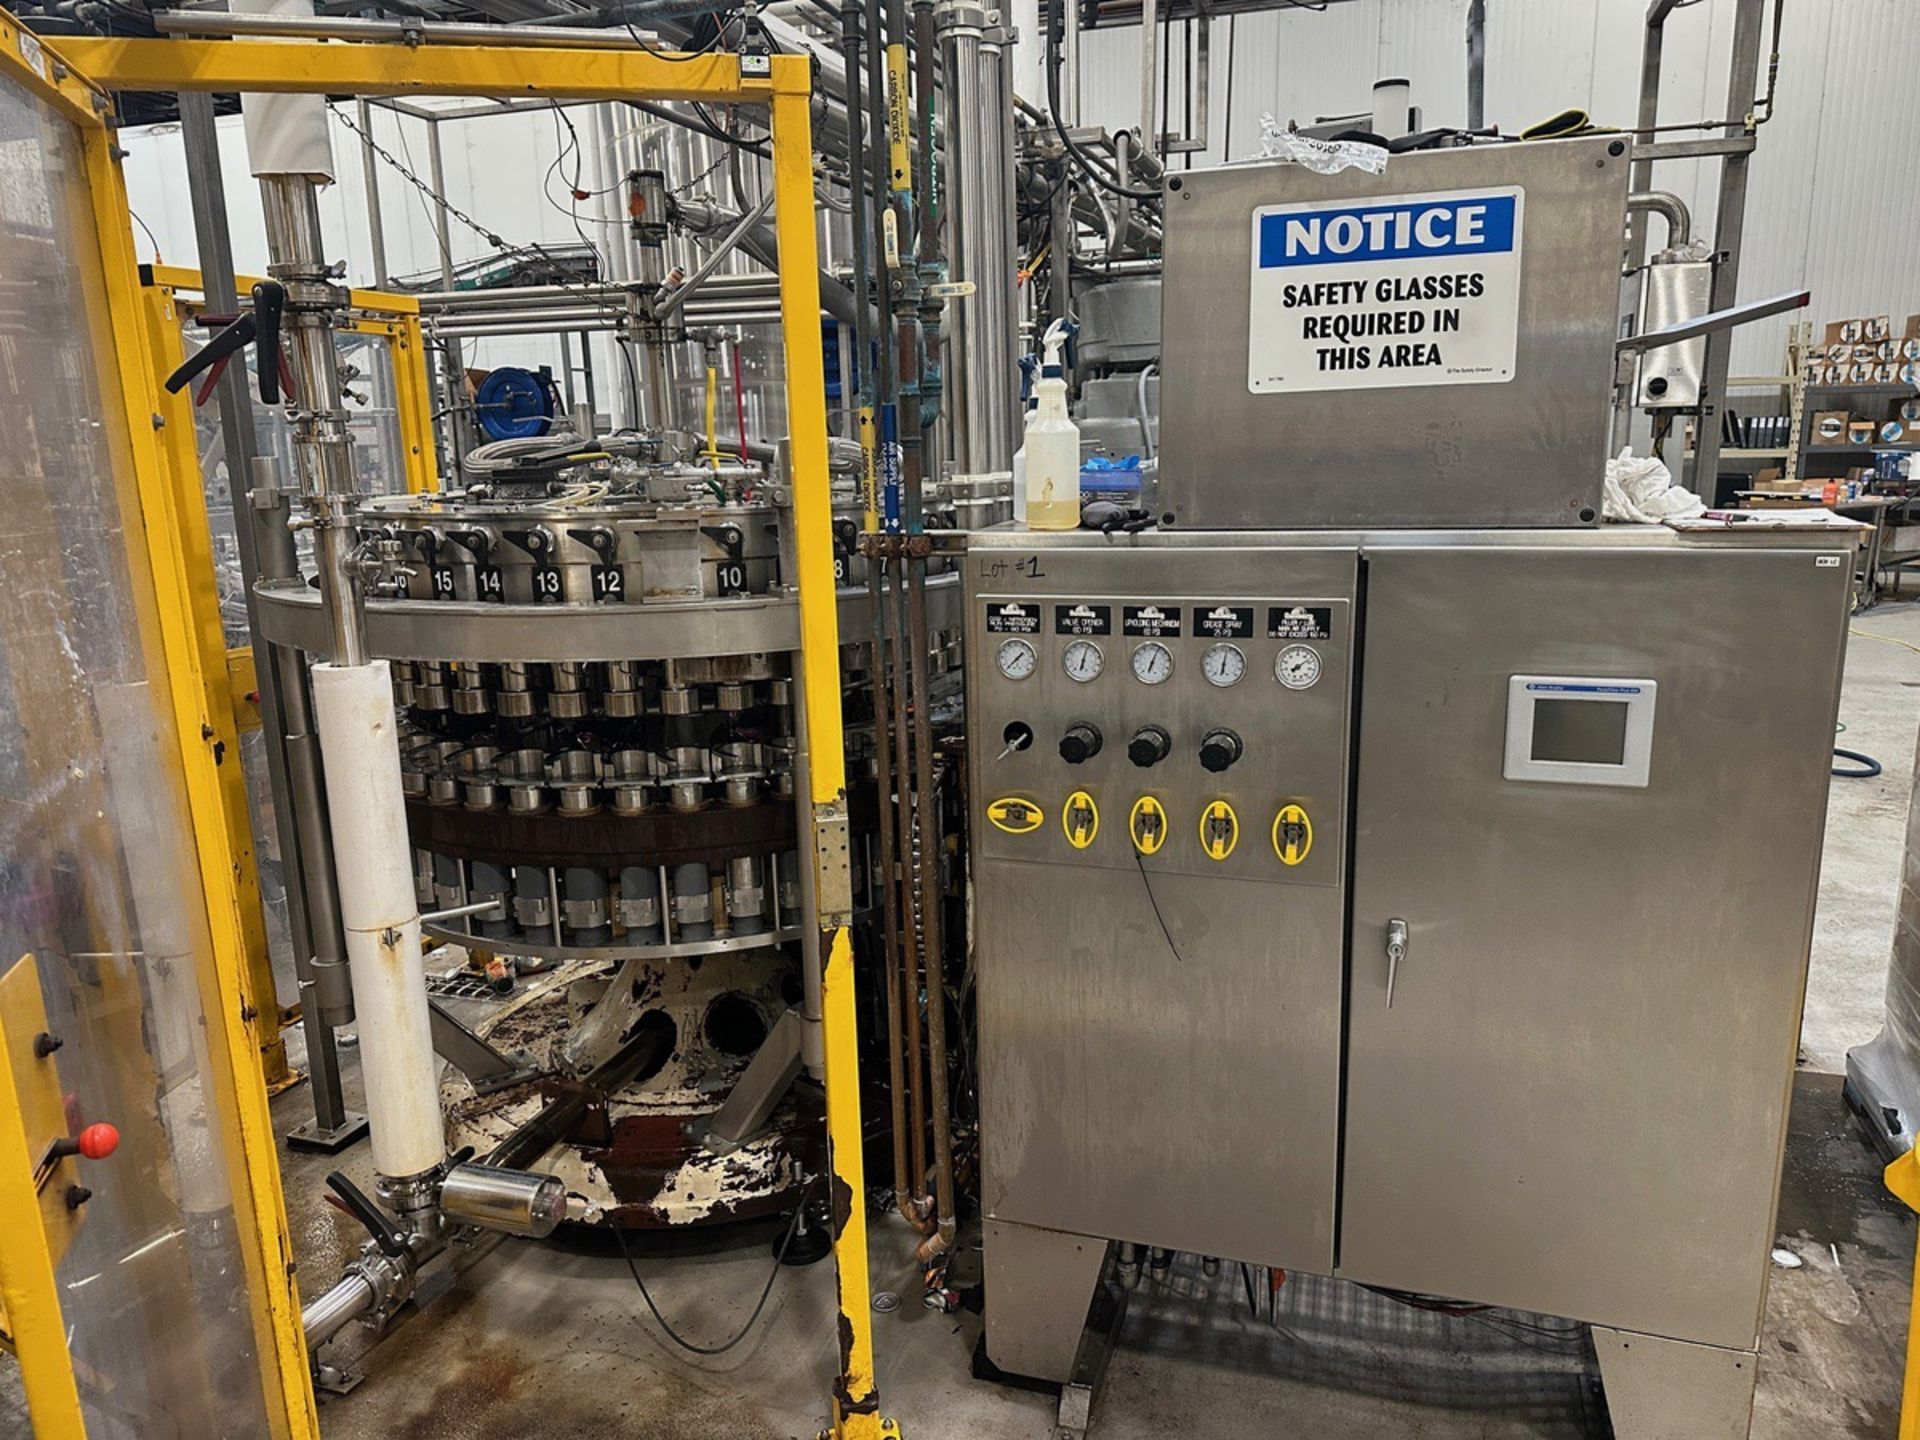 Bevcorp 40-Head FTCF Rotary Can Filler, 420 CPM with 12 oz Cans, S/N: - Subj to Bulk | Rig Fee $5000